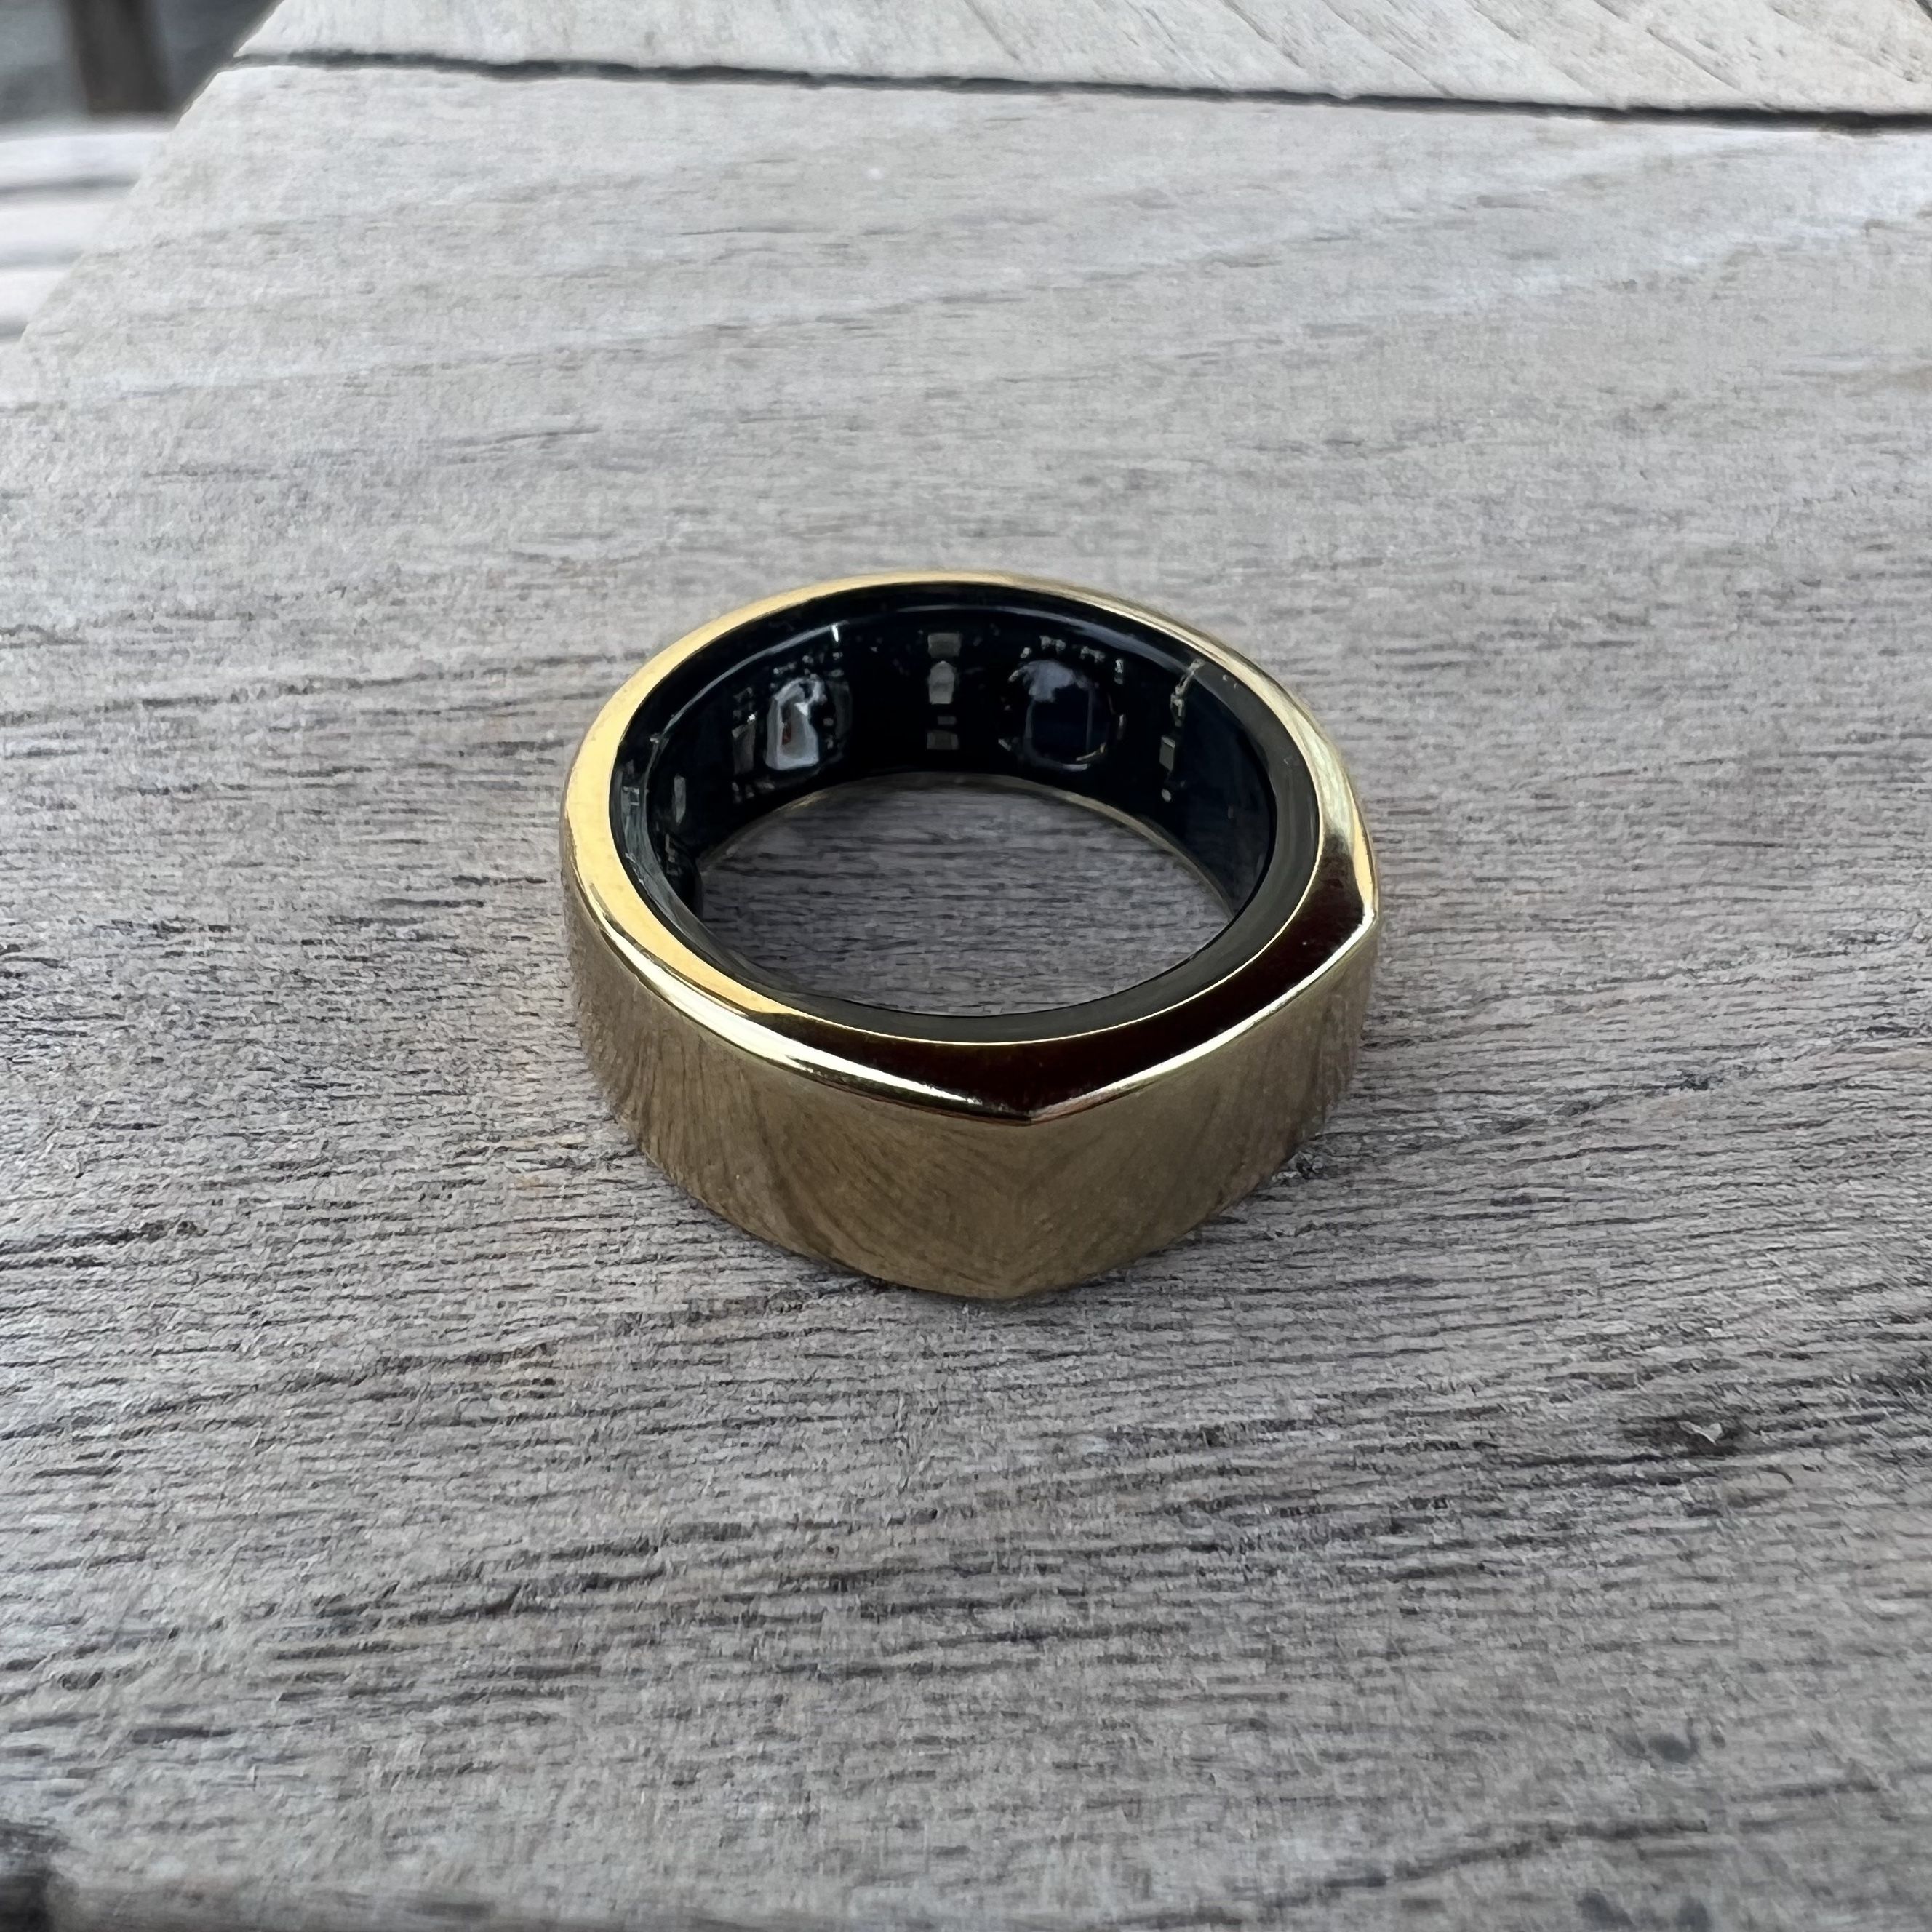 Oura Ring Review 2021: Is It Worth the Hype?